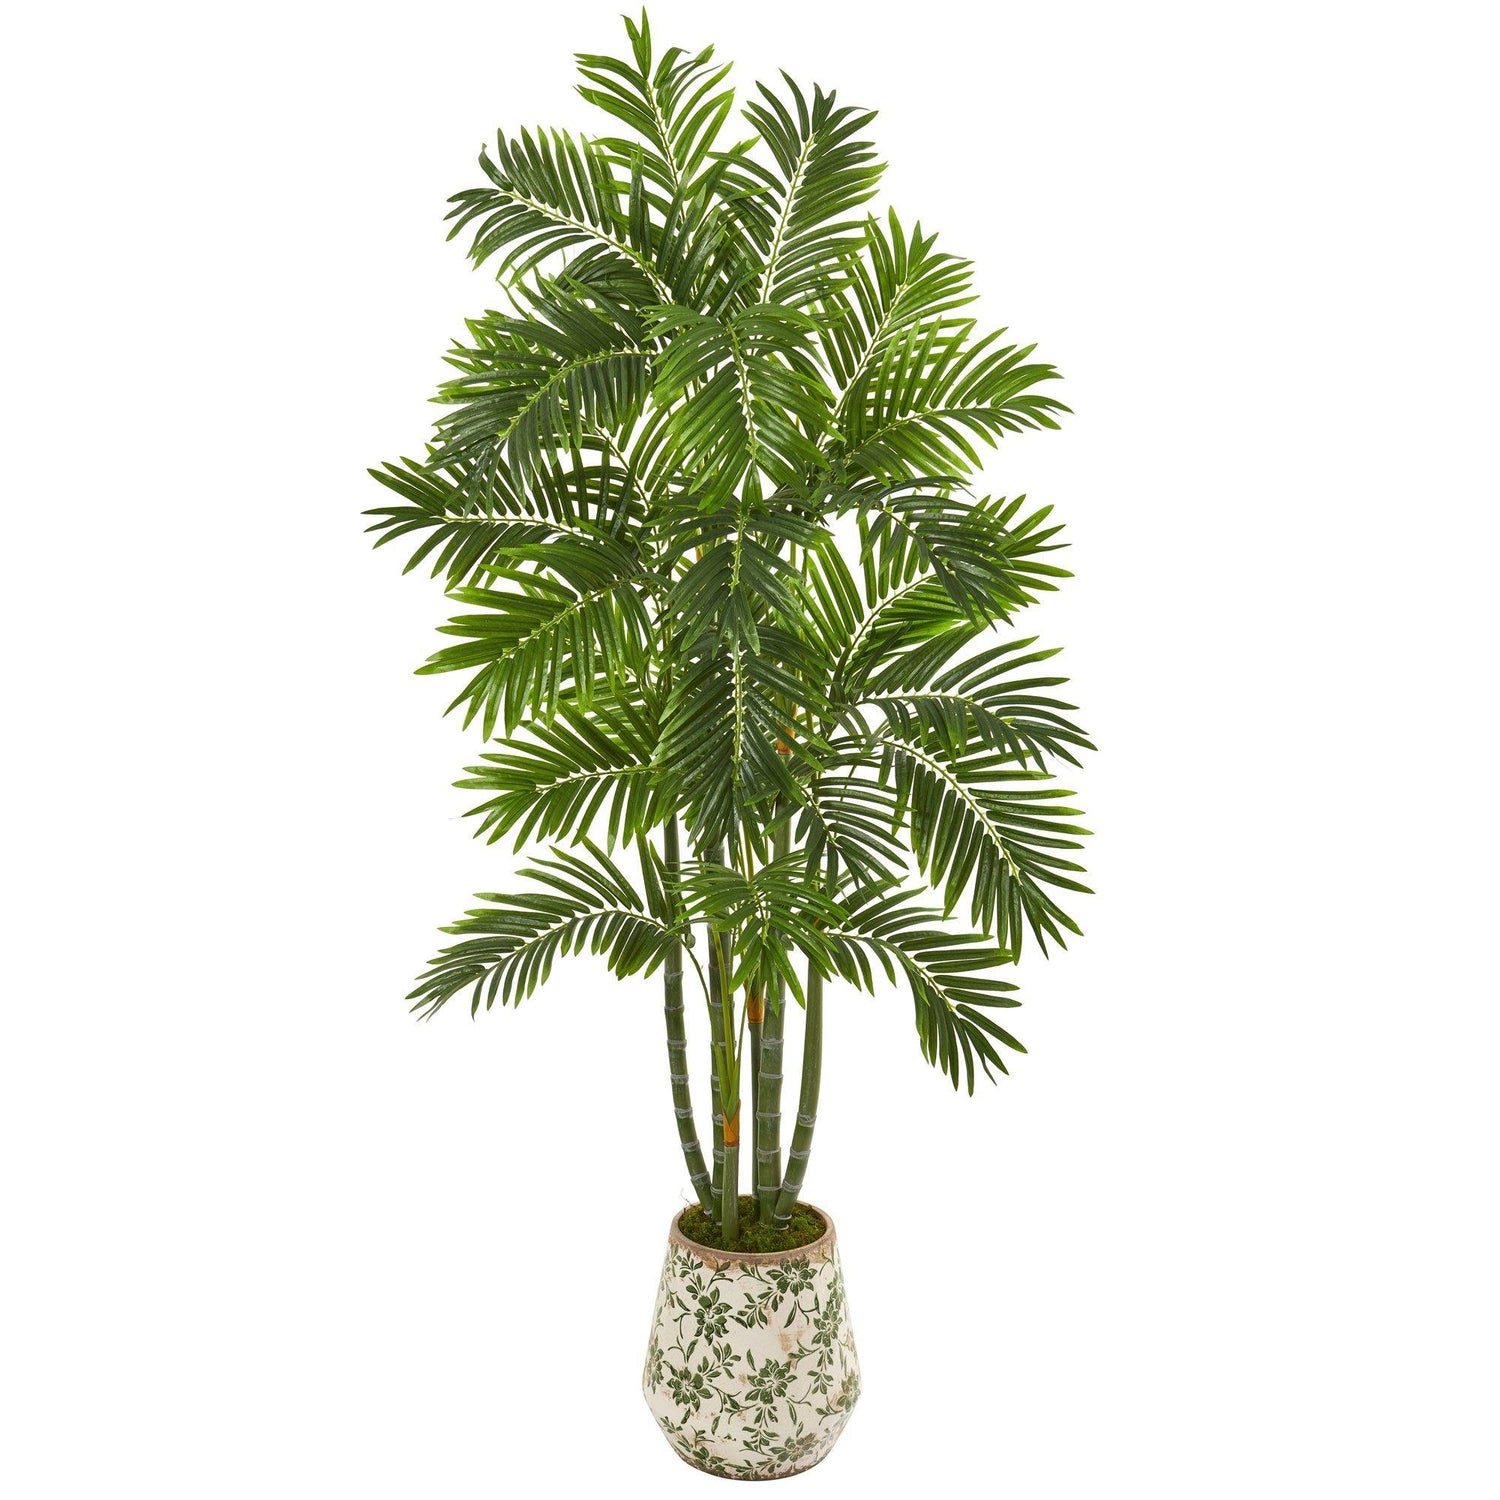 6’ Areca Palm Artificial Tree in Vintage Green Floral Planter